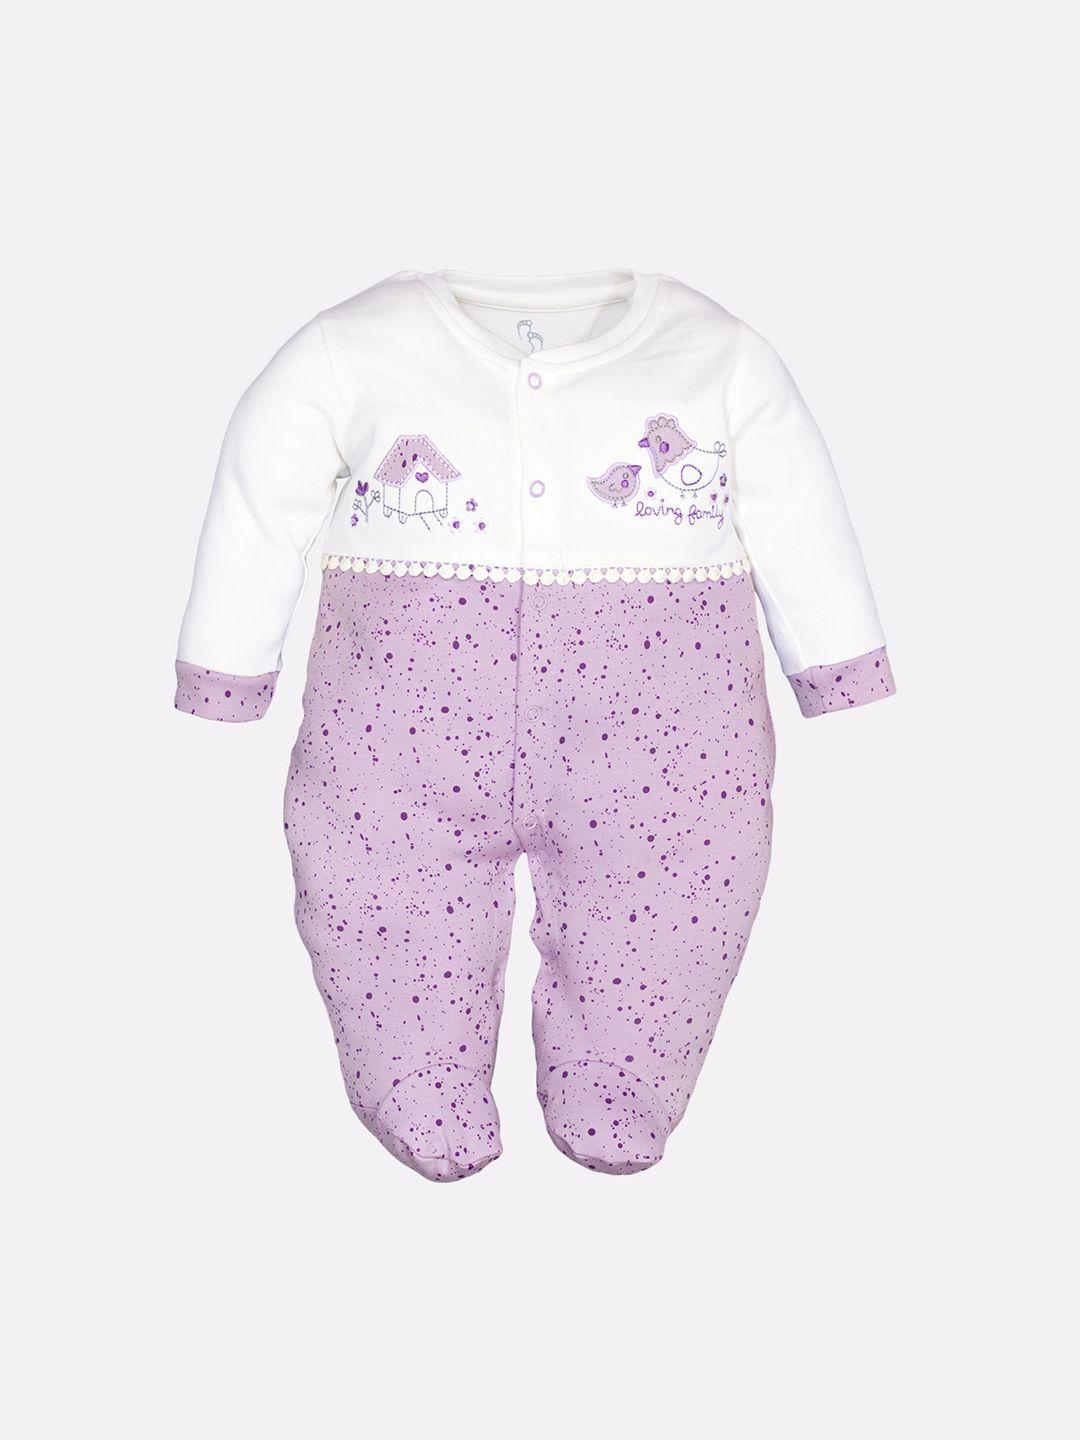 baby go kids purple printed cotton rompers